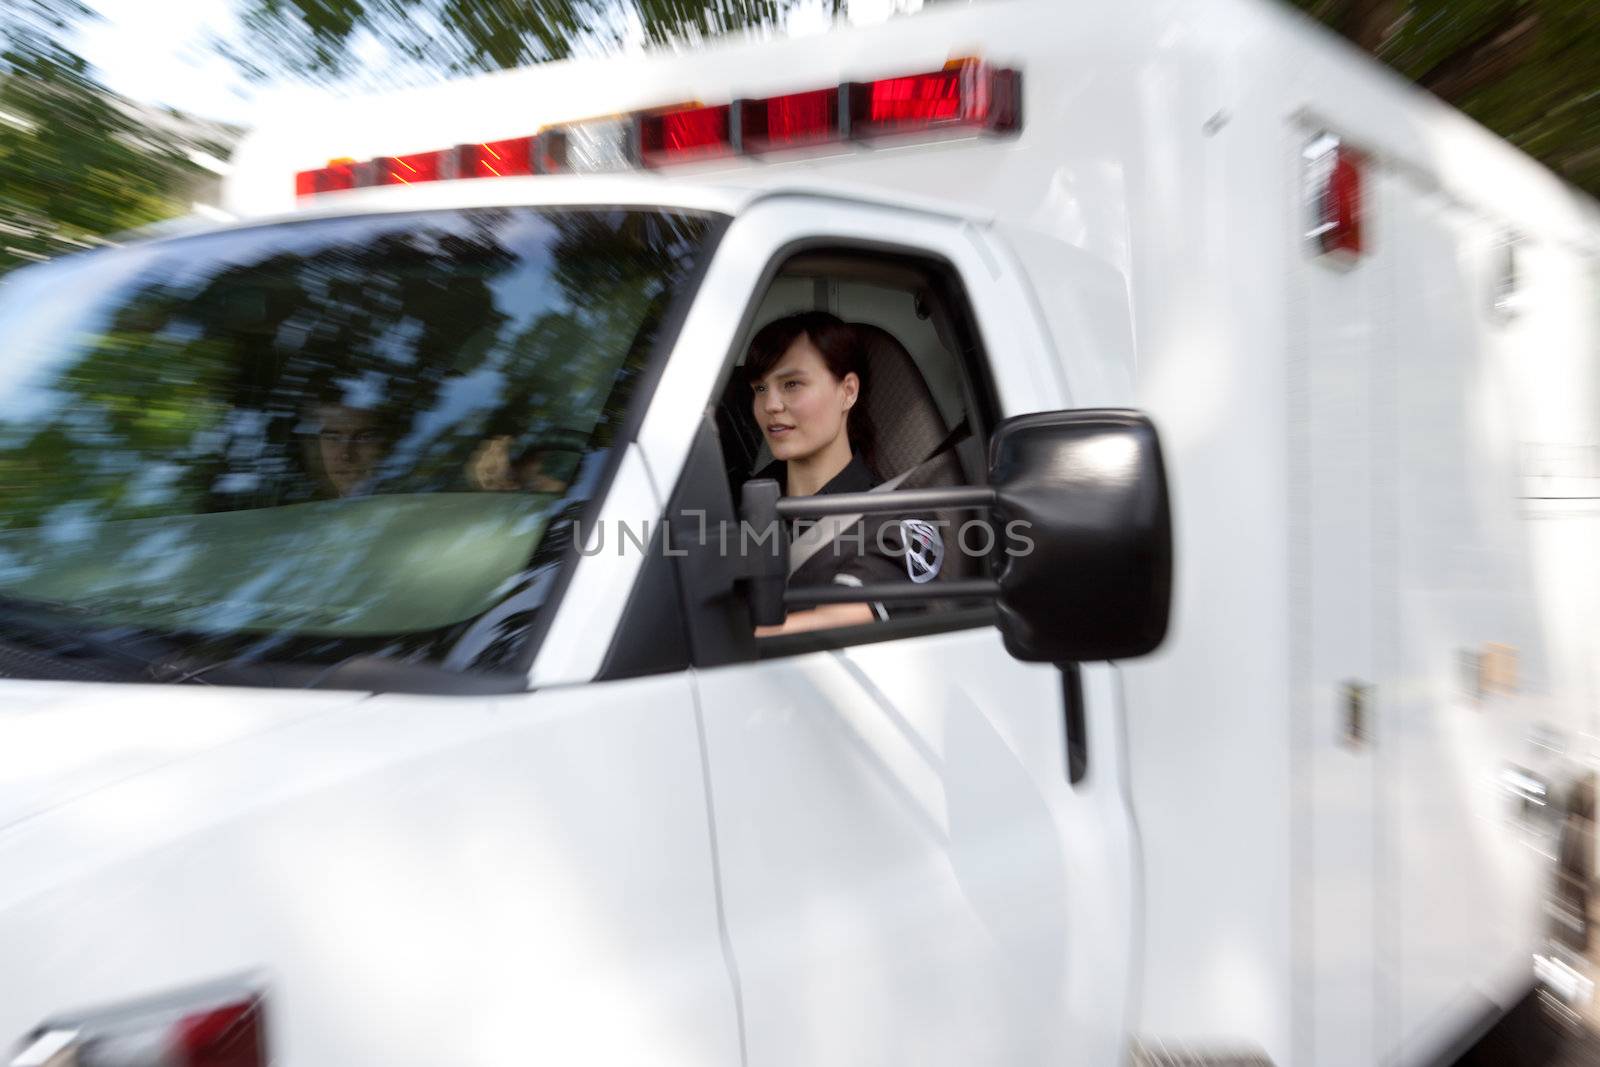 Motion blur of an ambulance speeding to accident